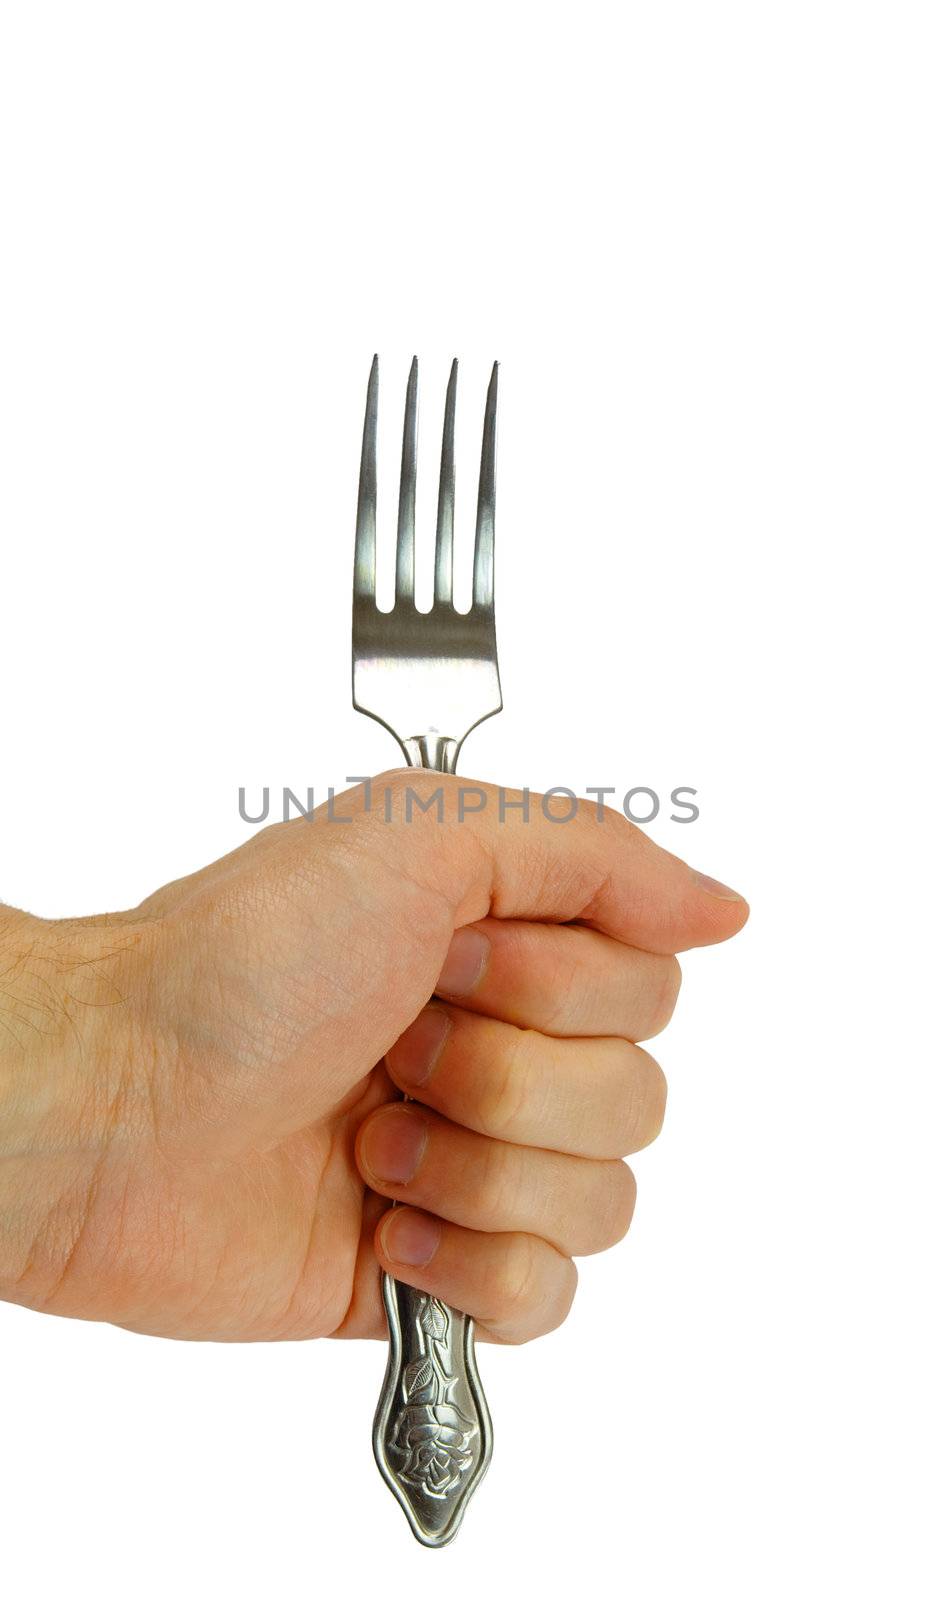 Man's hand holding a fork on a white background